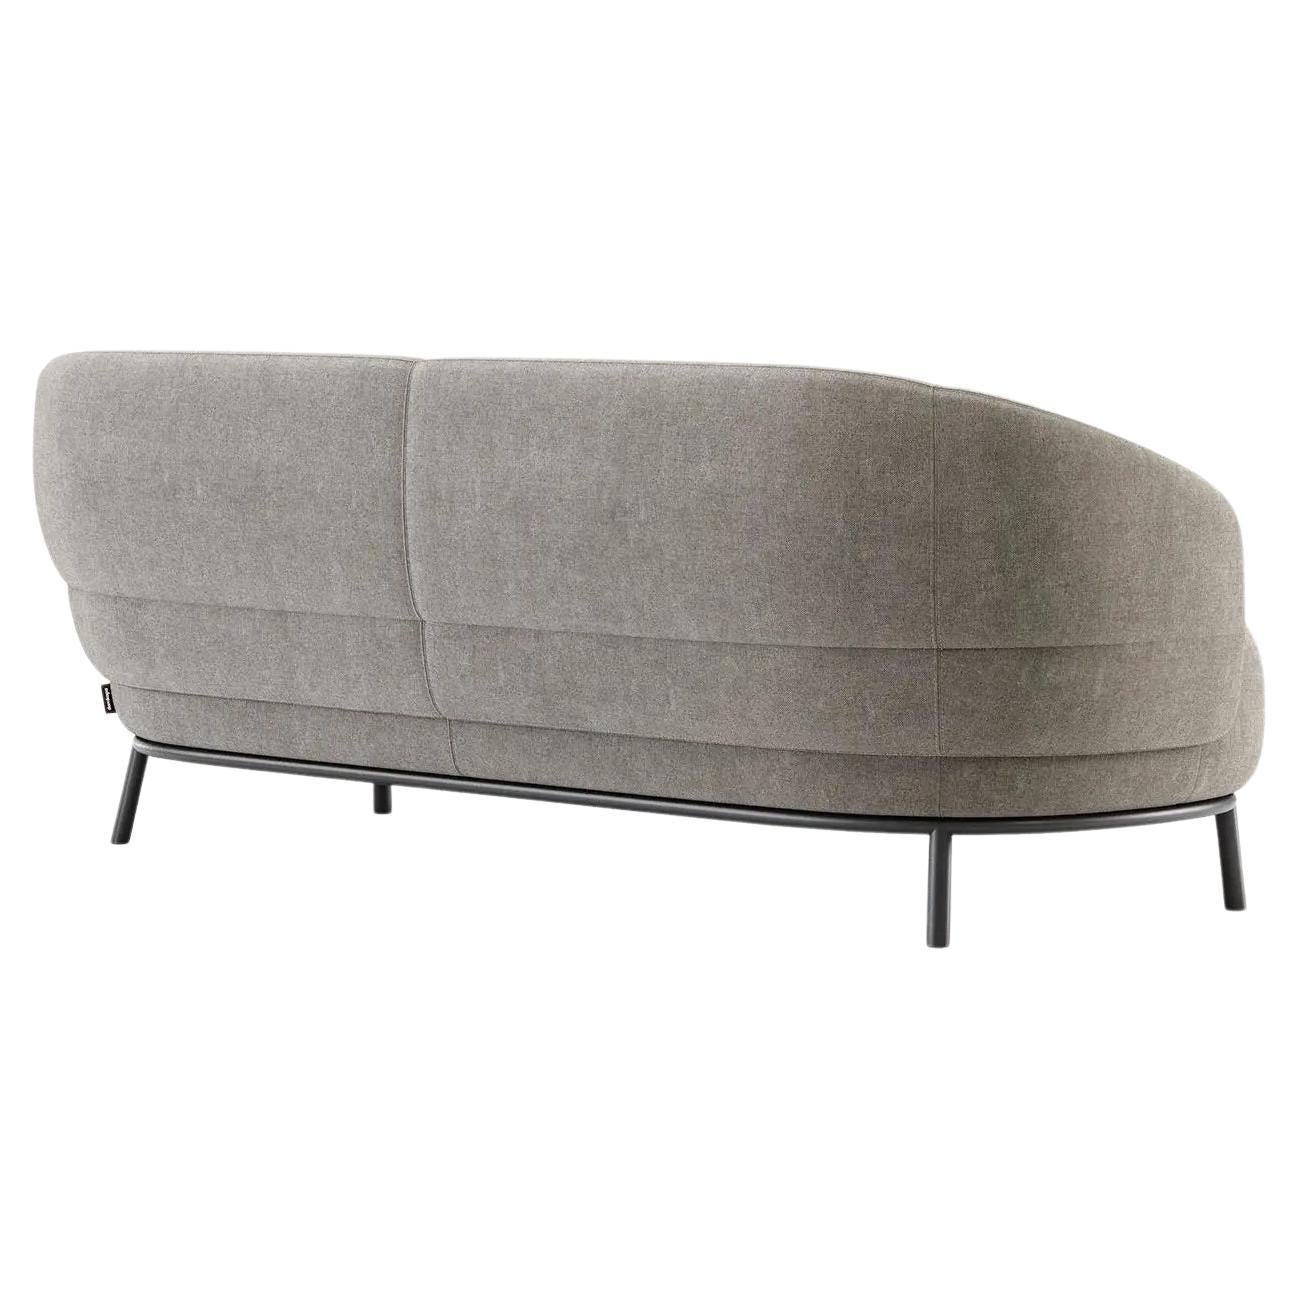 This sofa is a rounded piece supported by four steel legs and tubing. Characterized by soft curves and balanced proportions, the backrest extends to the sides creating subtle and elegant armrests. The highlight of this piece is represented by the